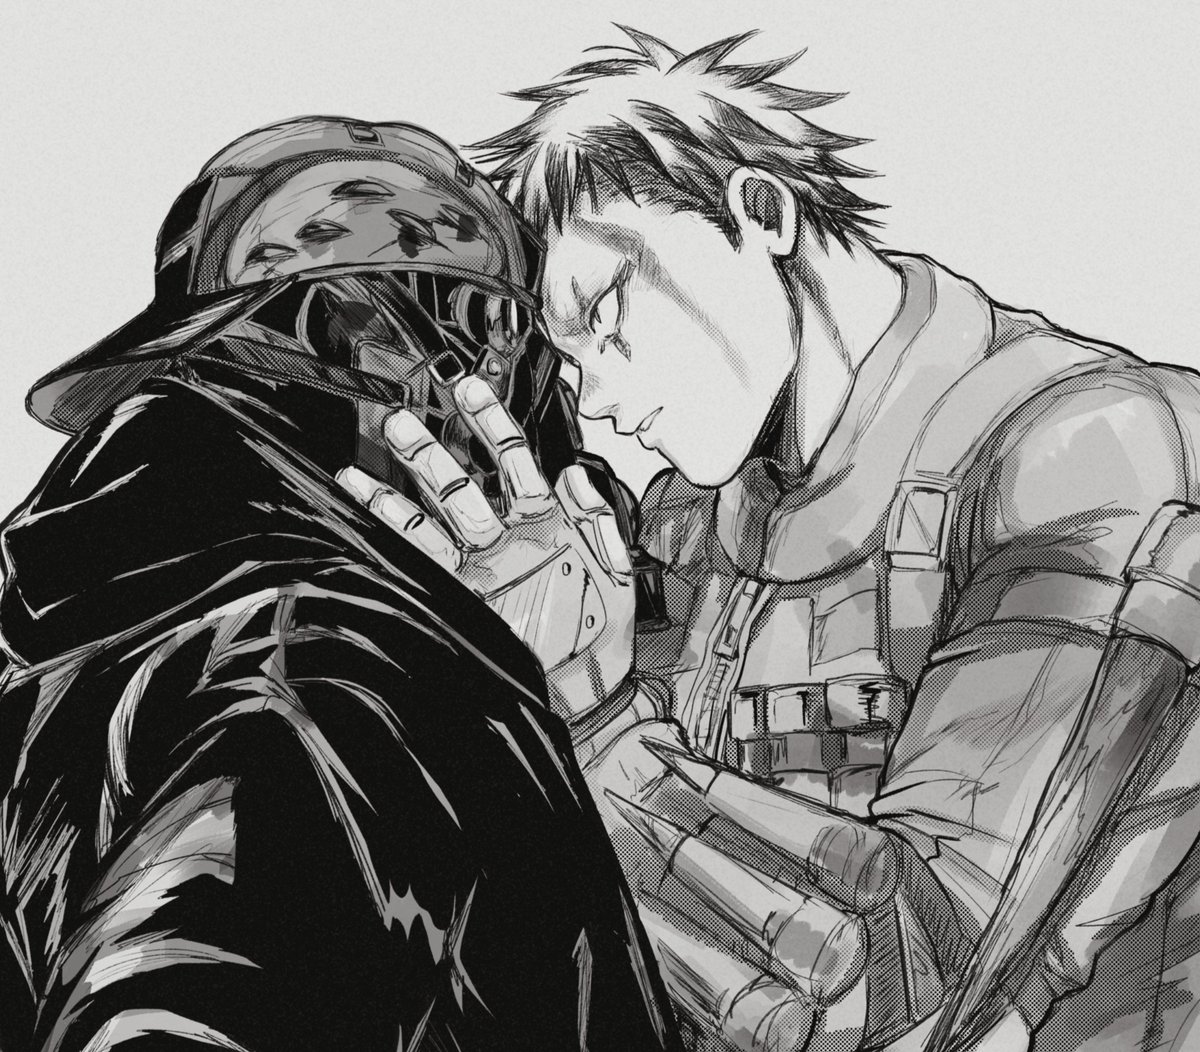 Honestly they are so in love I can't help myself.
#dorohedoro 